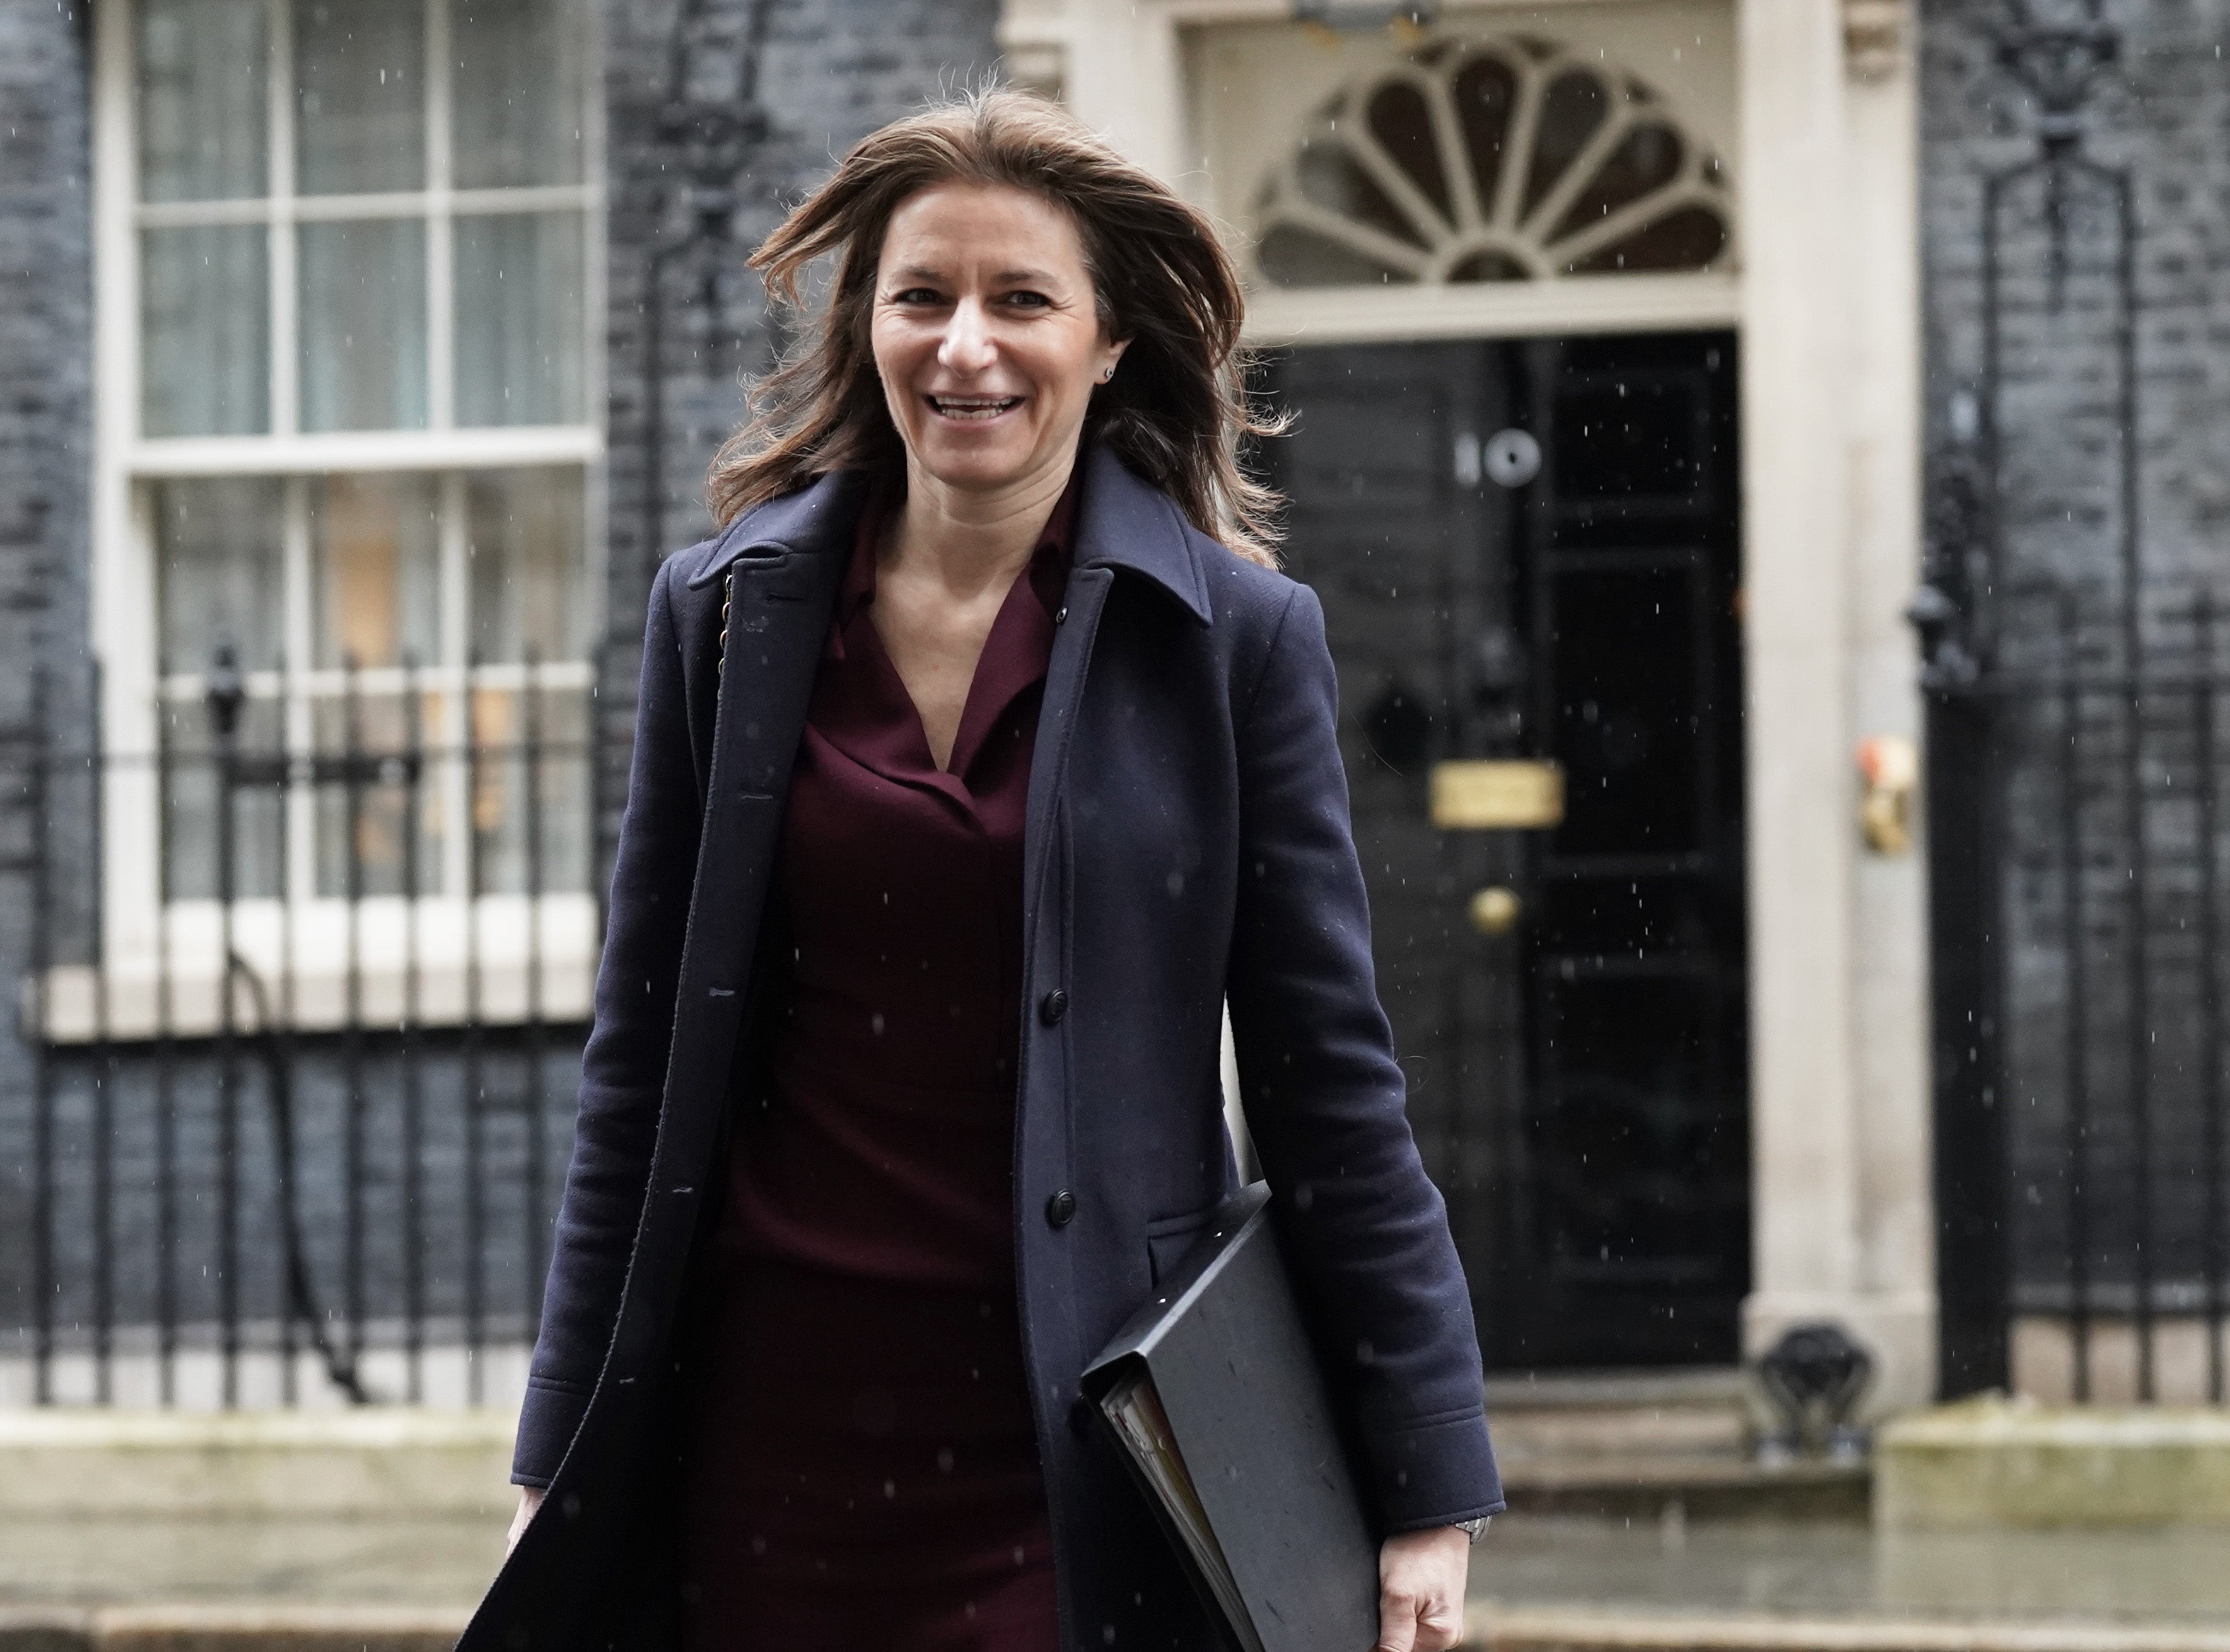 Lucy Frazer has been urged by more than 100 crossparty MPs to block the deal